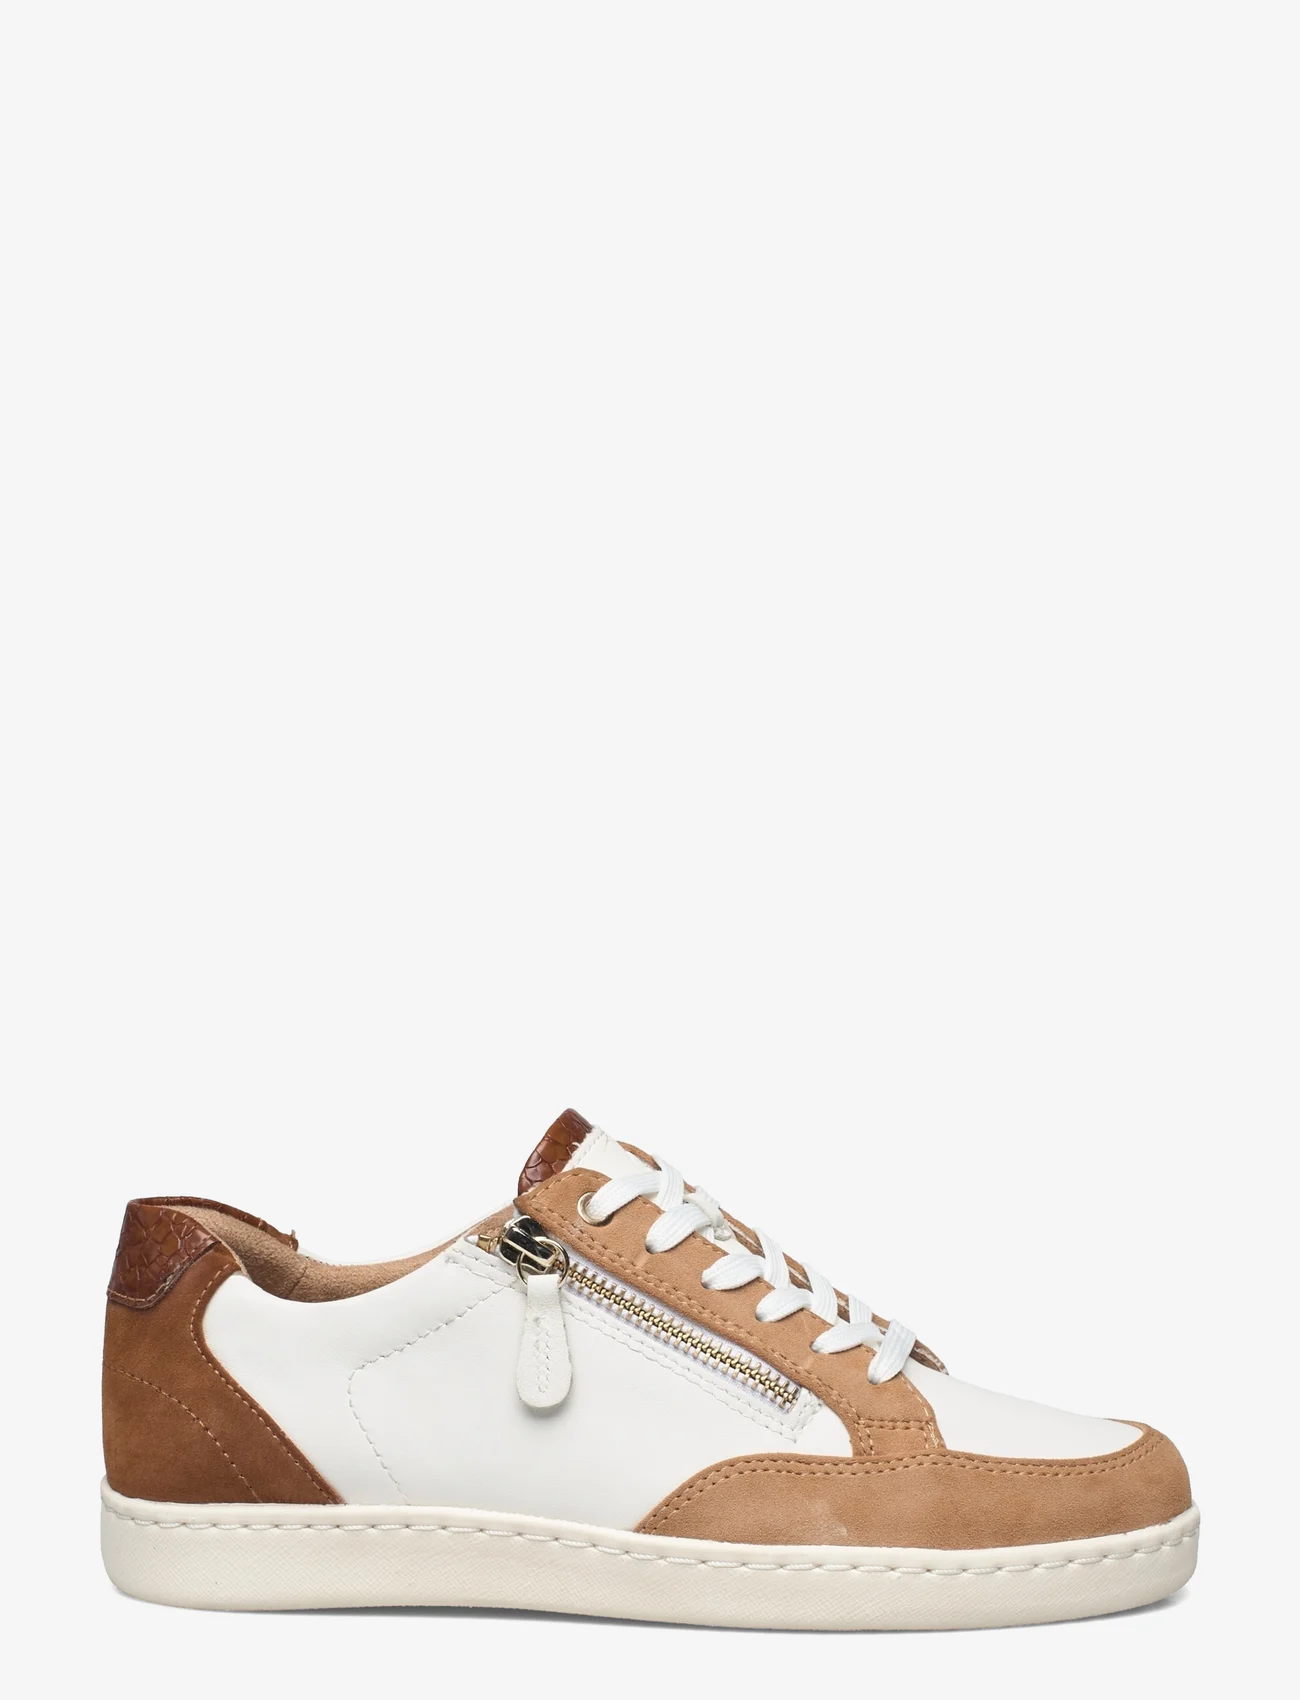 Tamaris - Woms Lace-up - lage sneakers - wht/almond com - 1